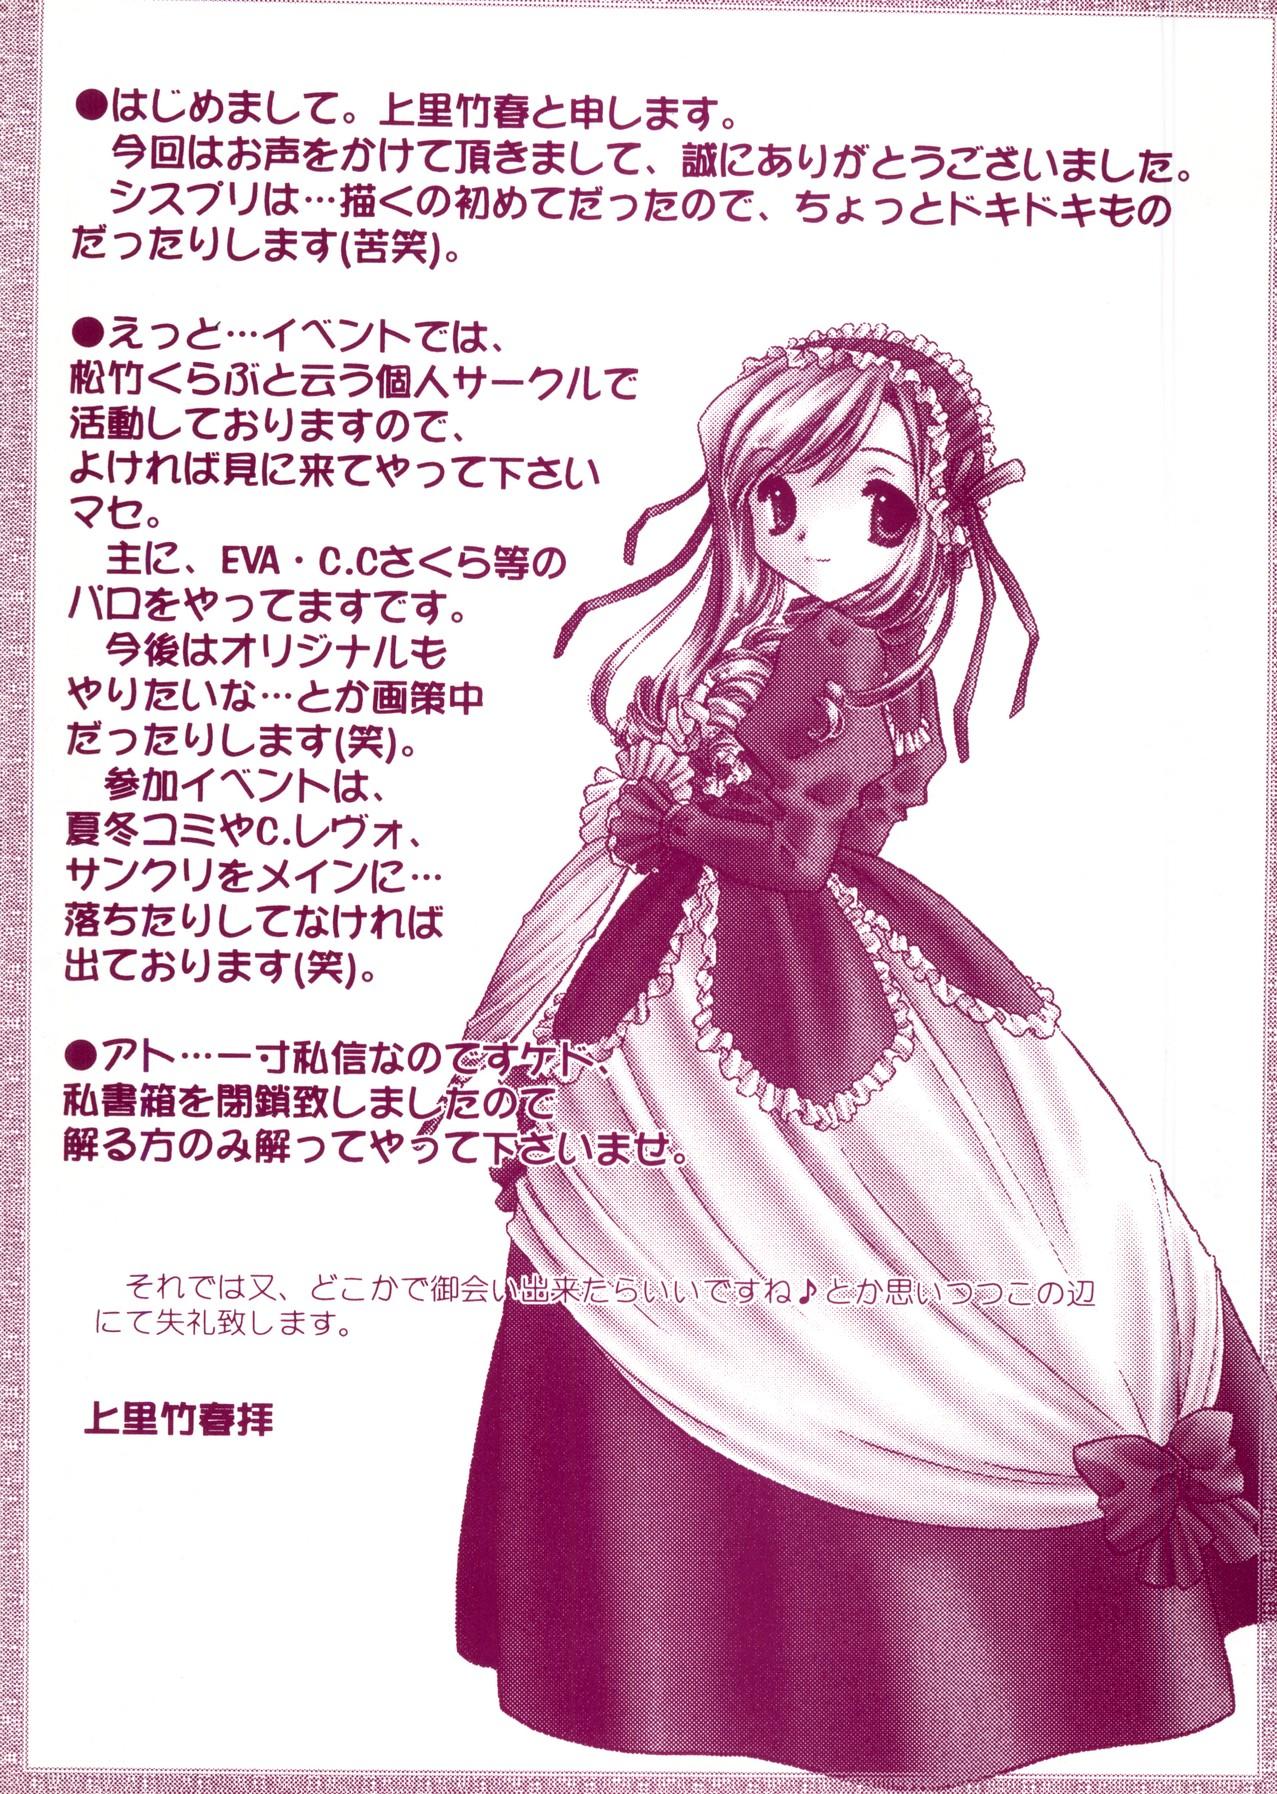 Solo Female Rabukore - Lovely Collection Vol. 3 - Ojamajo doremi Sister princess Onegai teacher Chobits Oral Sex - Page 166